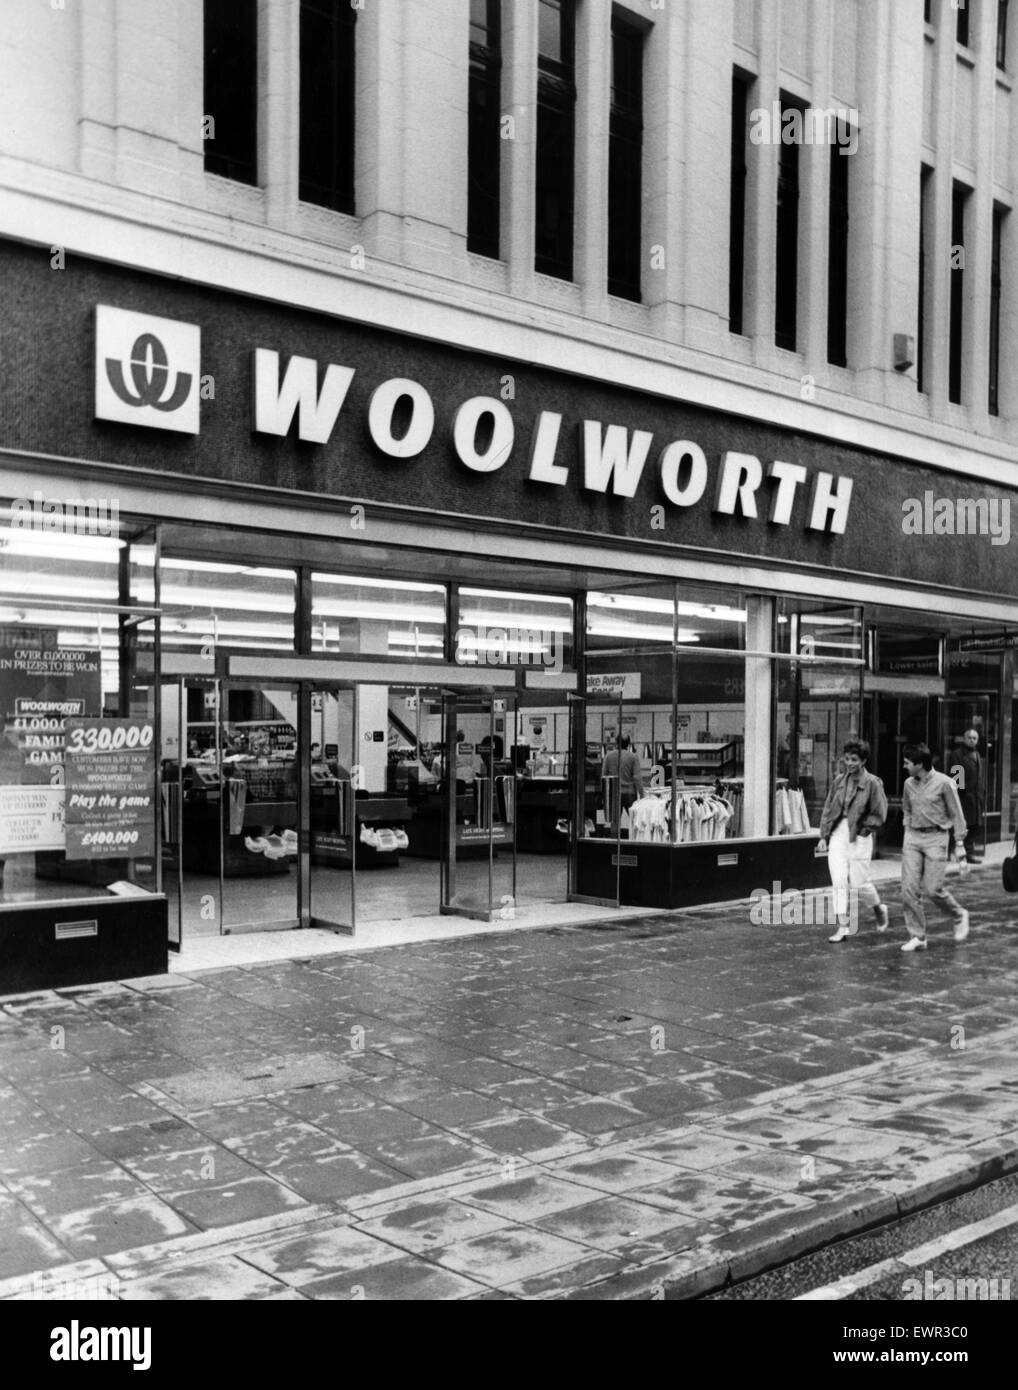 Woolworth Department Store, Northumberland Street, Newcastle, 4 agosto 1984. Foto Stock